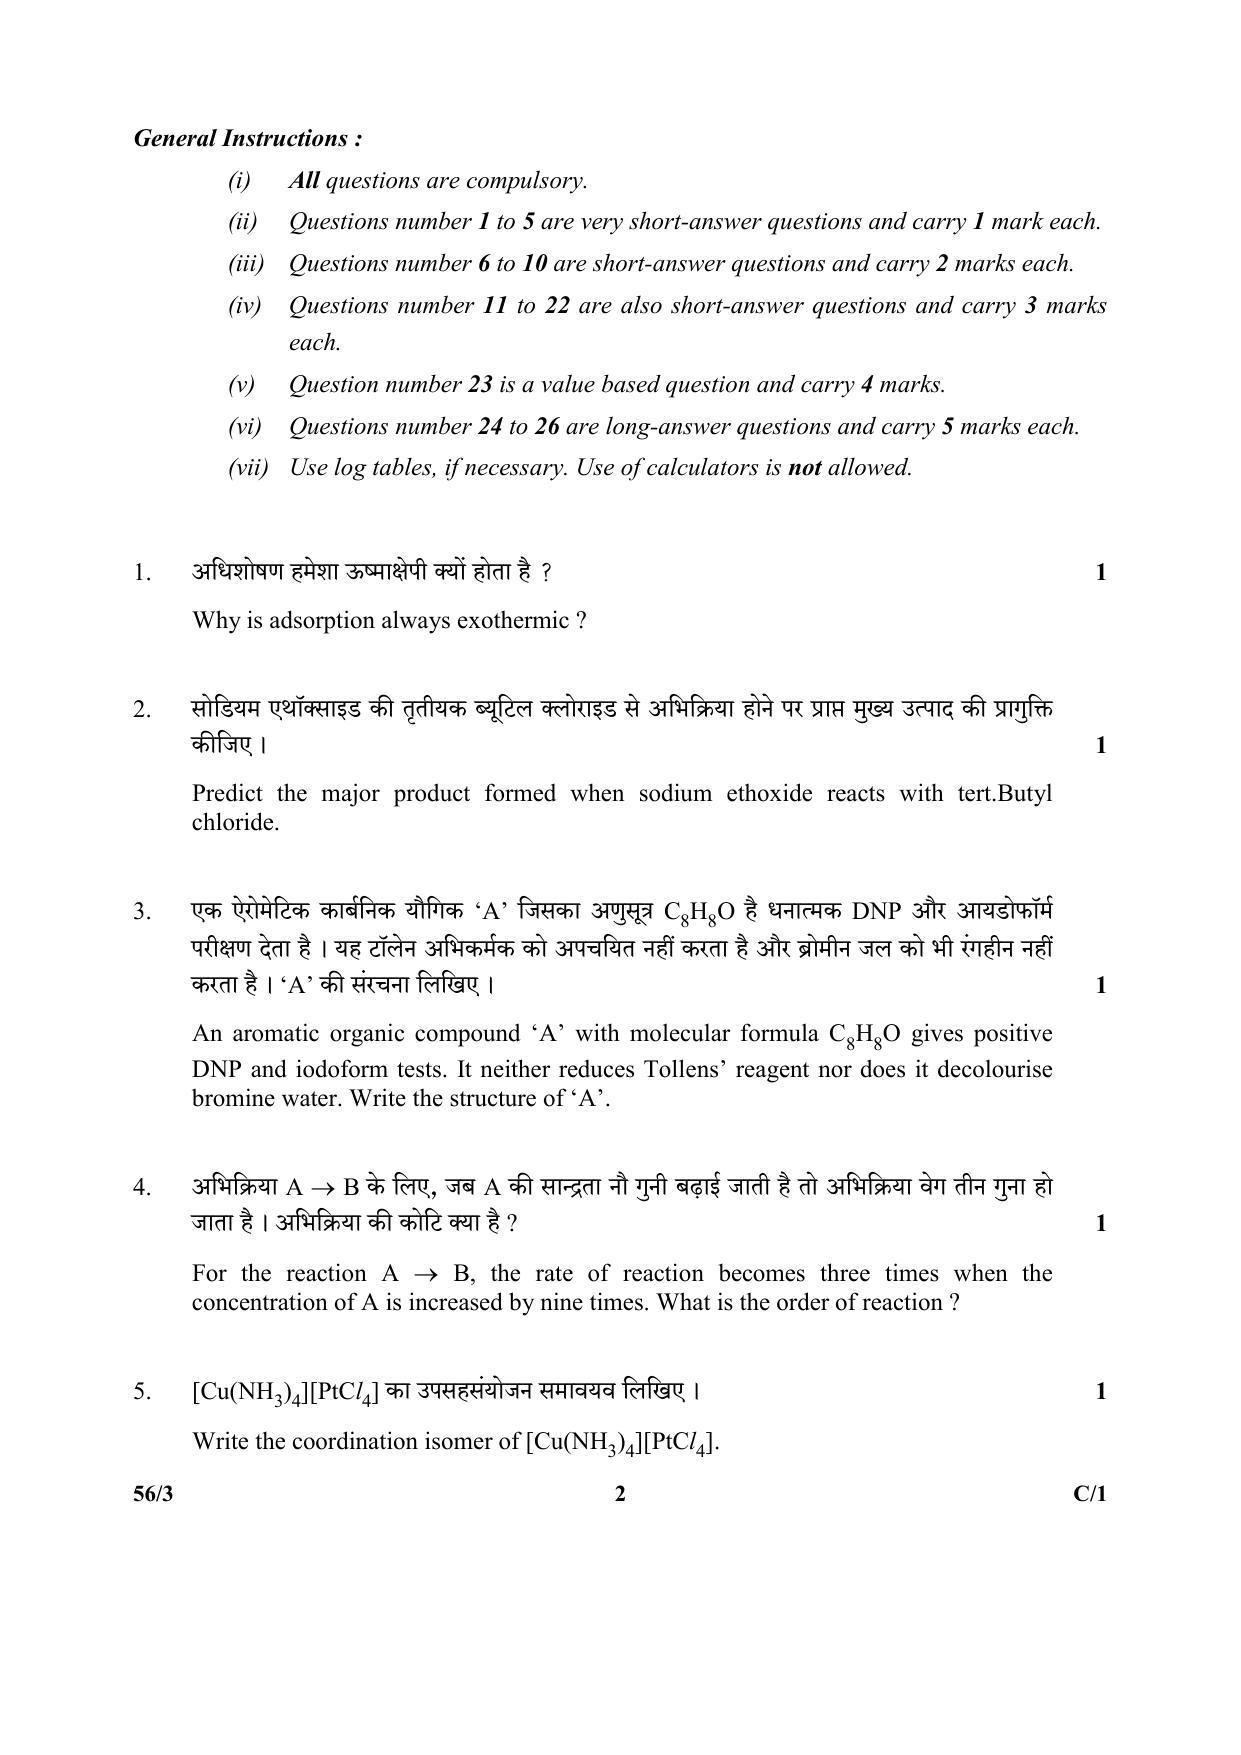 CBSE Class 12 56-3 (Chemistry) 2018 Compartment Question Paper - Page 2